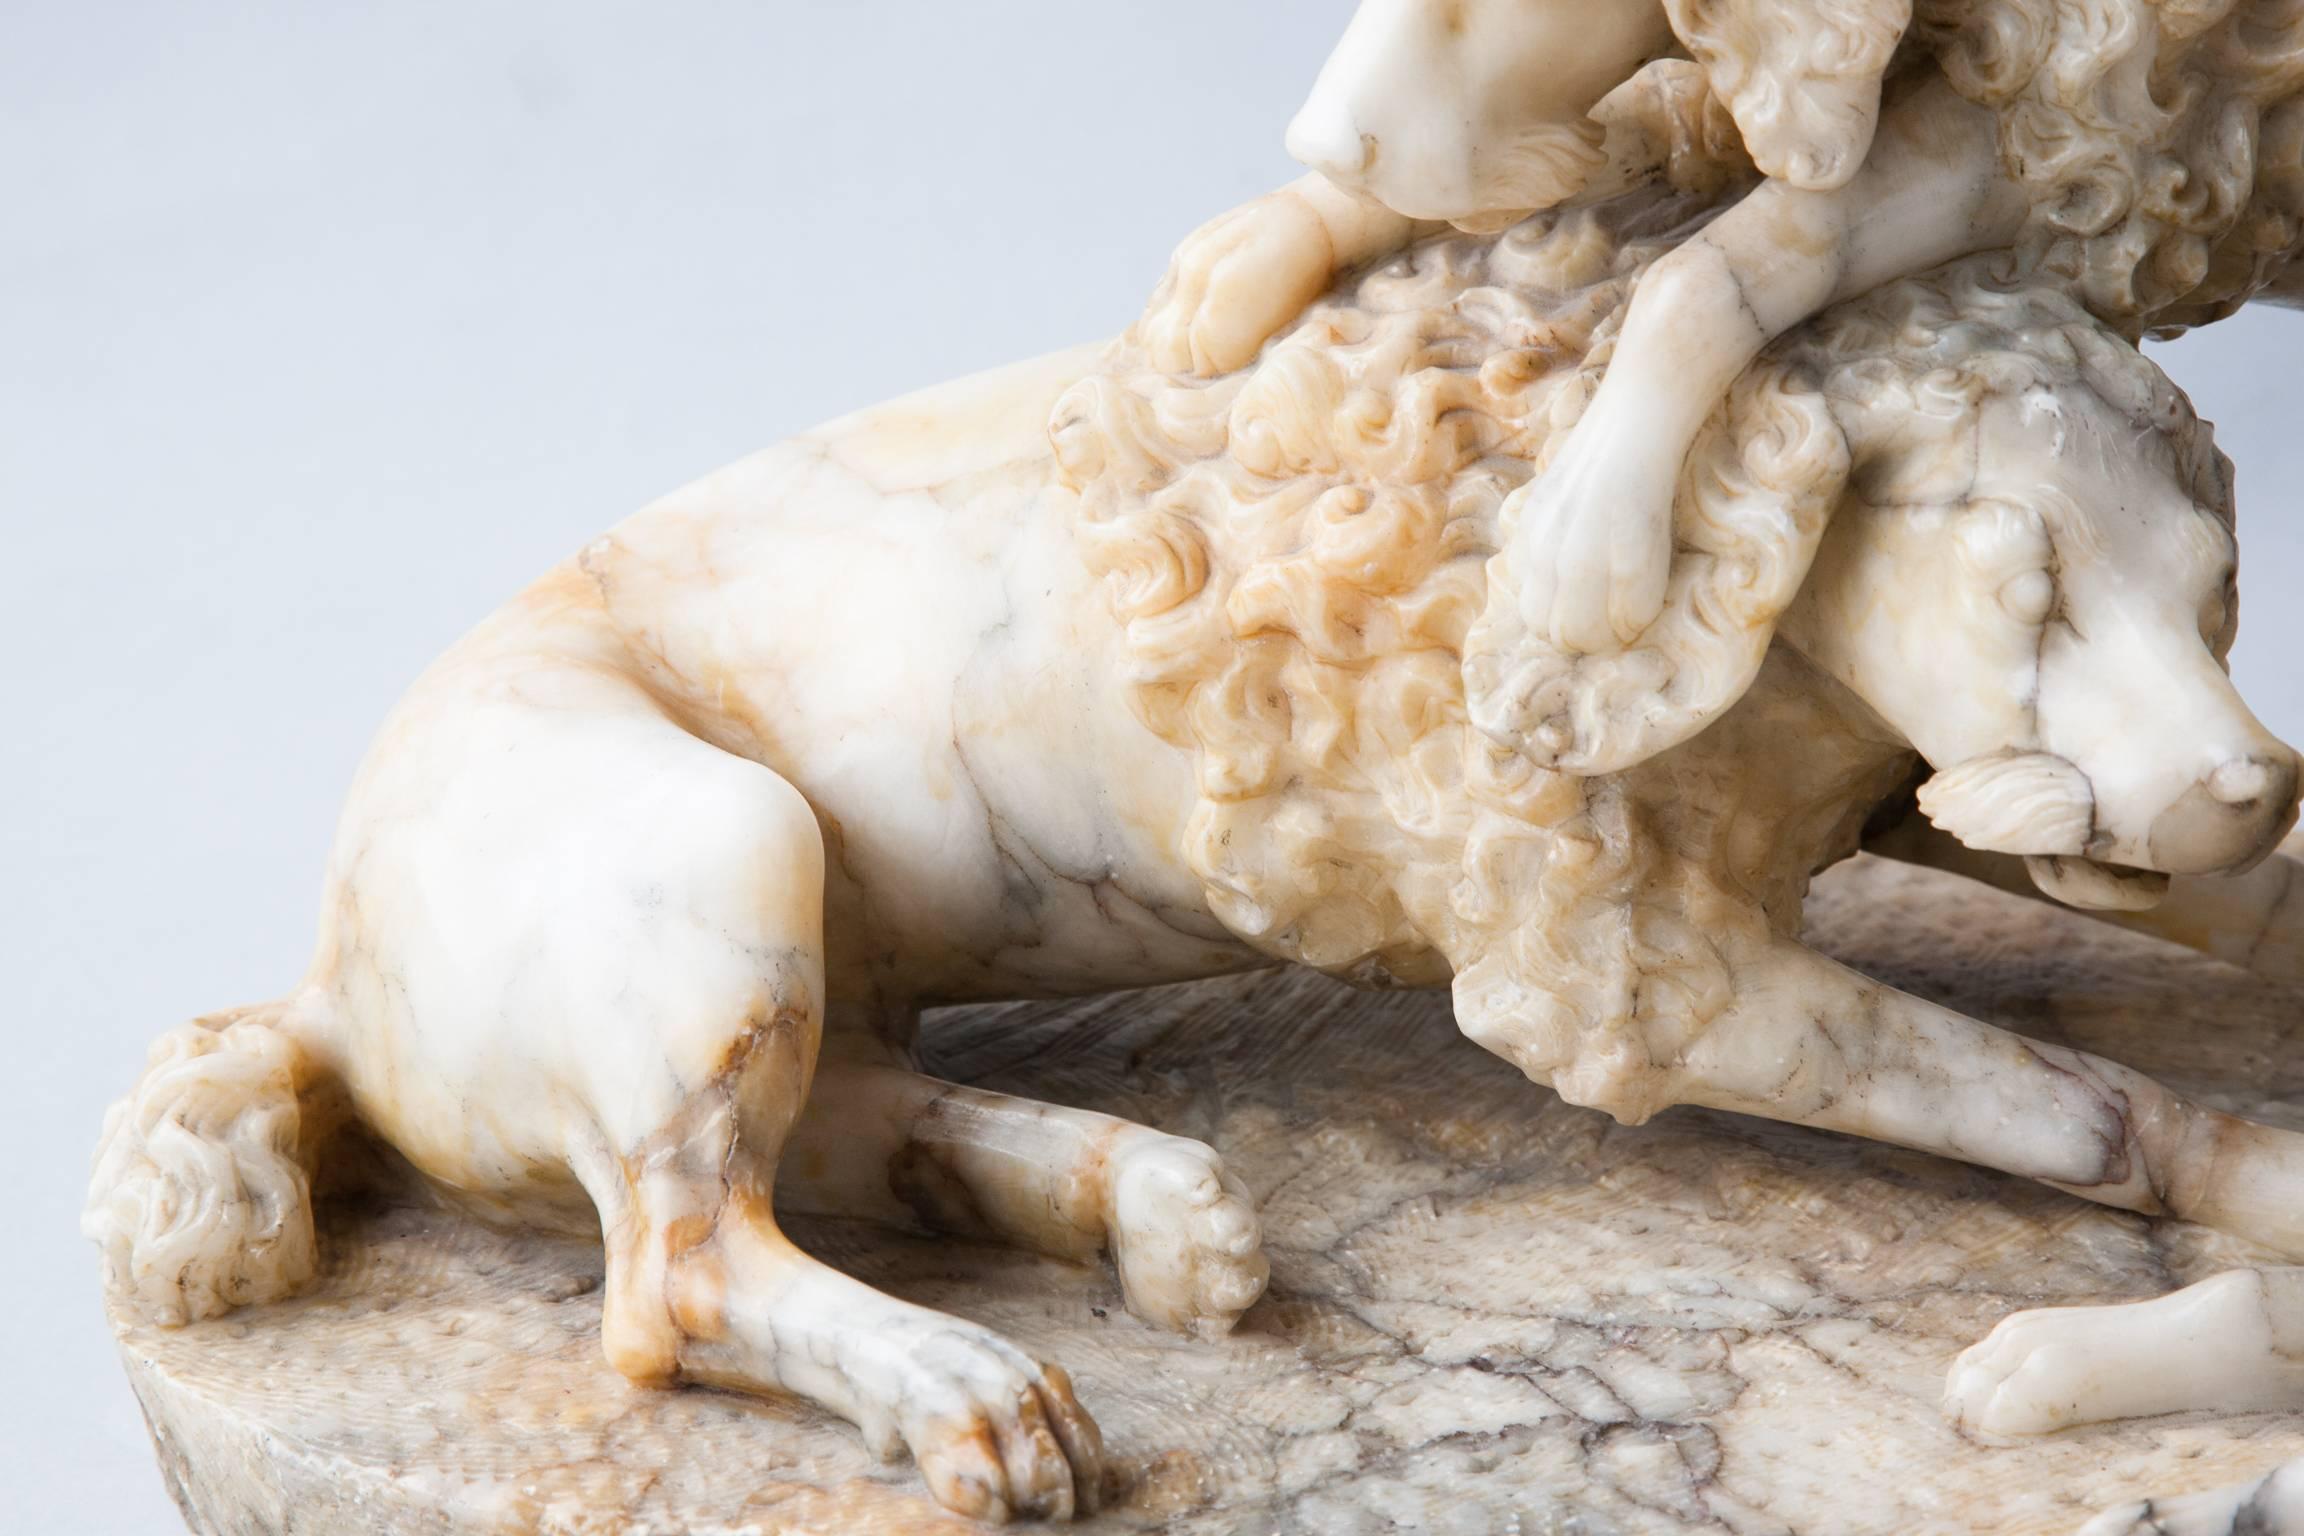 Early 19th Century European Alabaster Sculpture of Three Dogs Playing, circa 1800 For Sale